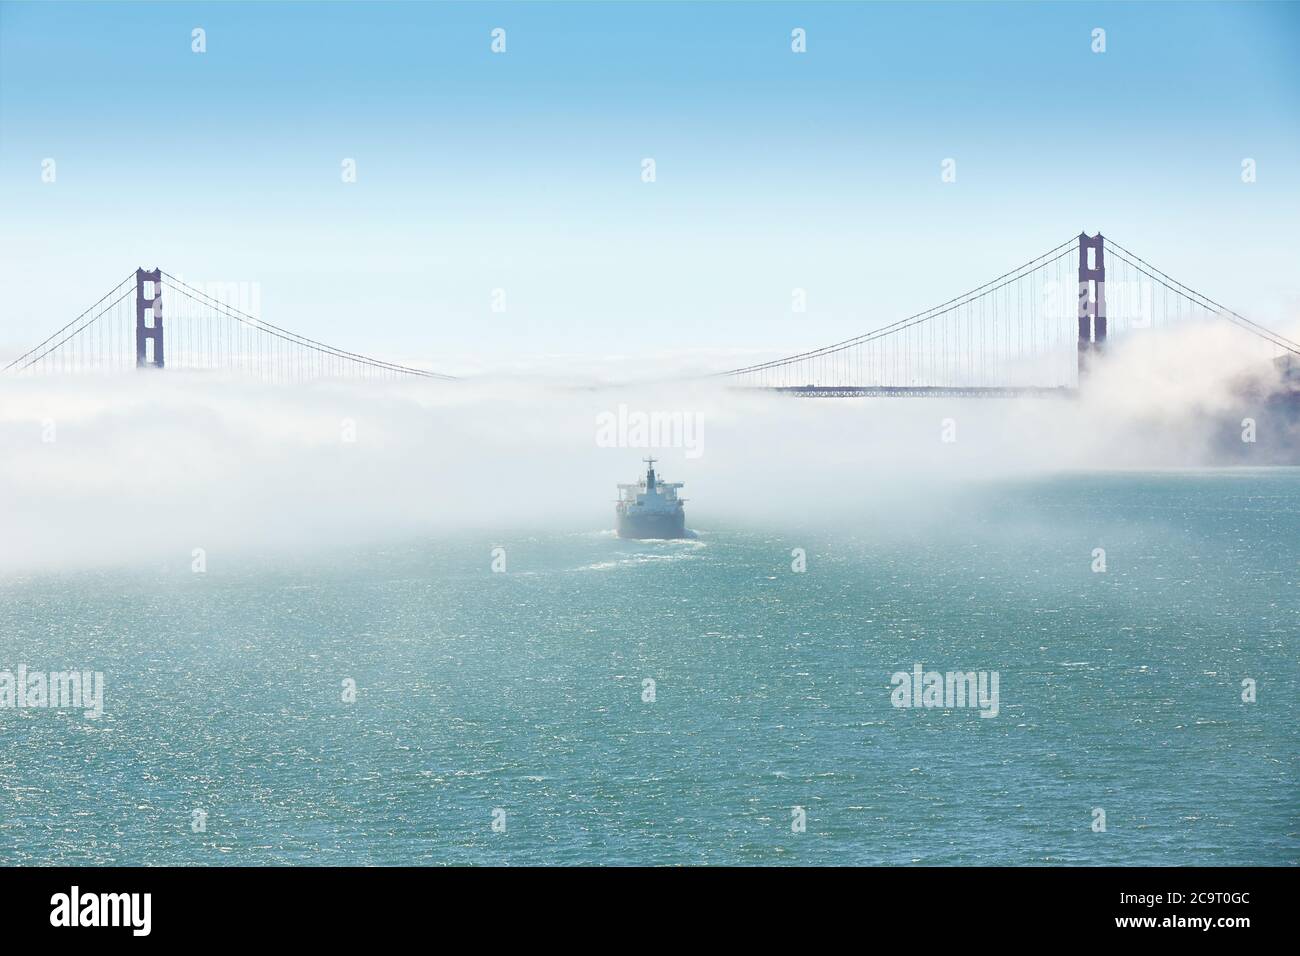 An Oil Tanker (Crude Oil Tanker), Enters A Bank Of Sea Fog As She Departs The San Francisco Bay For The Pacific Ocean Stock Photo